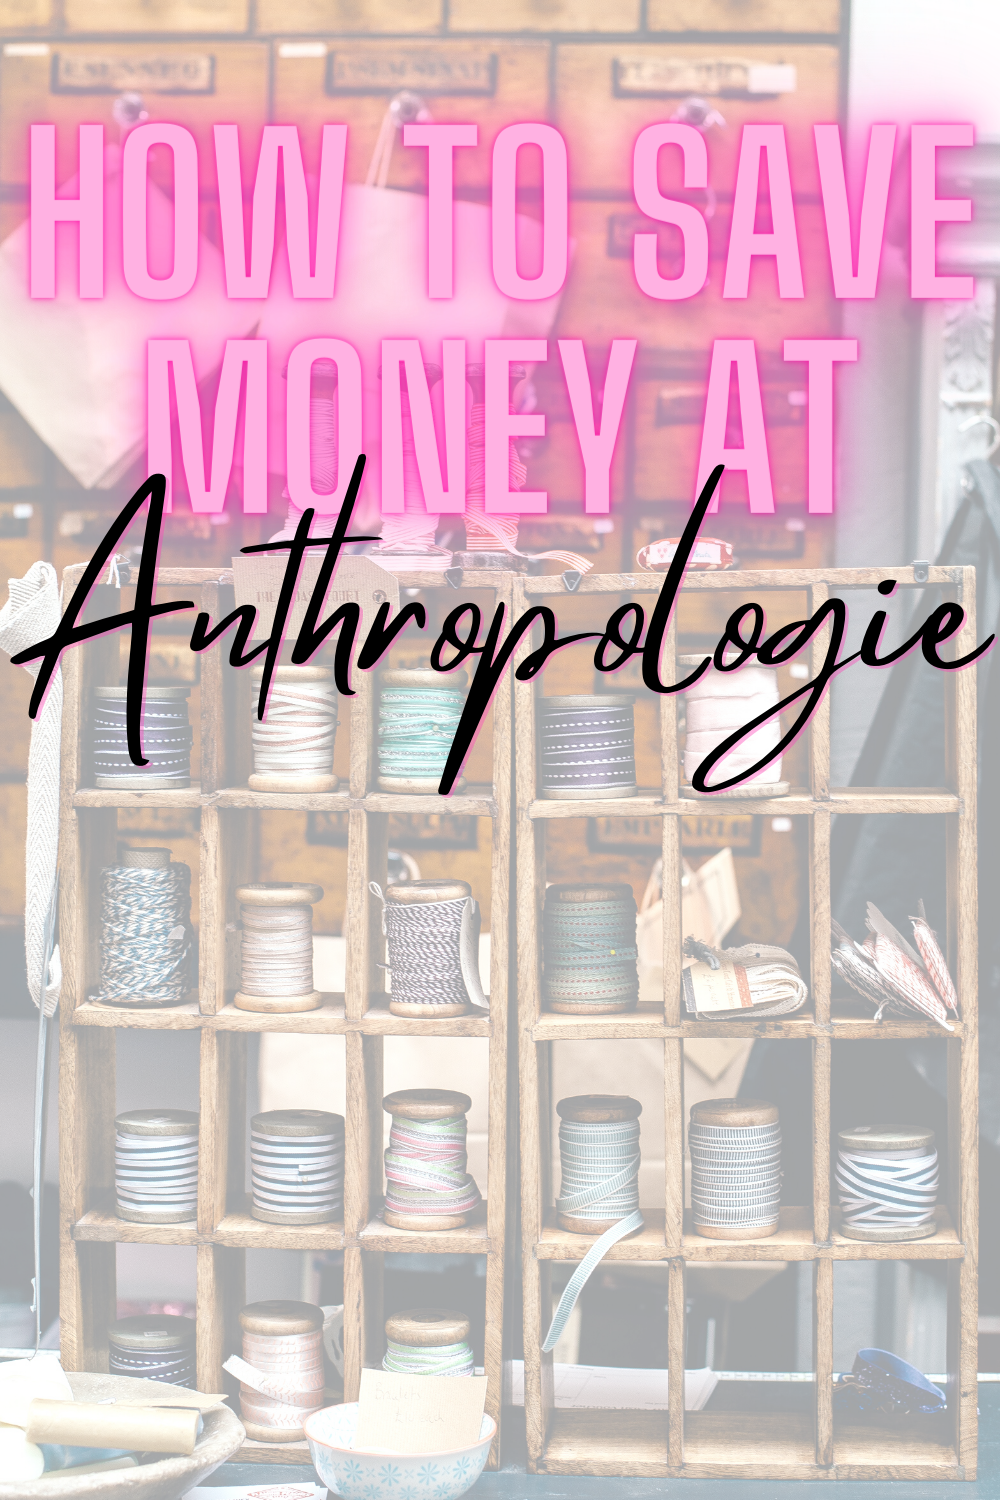 HOW TO SAVE MONEY AT ANTHROPOLOGIE